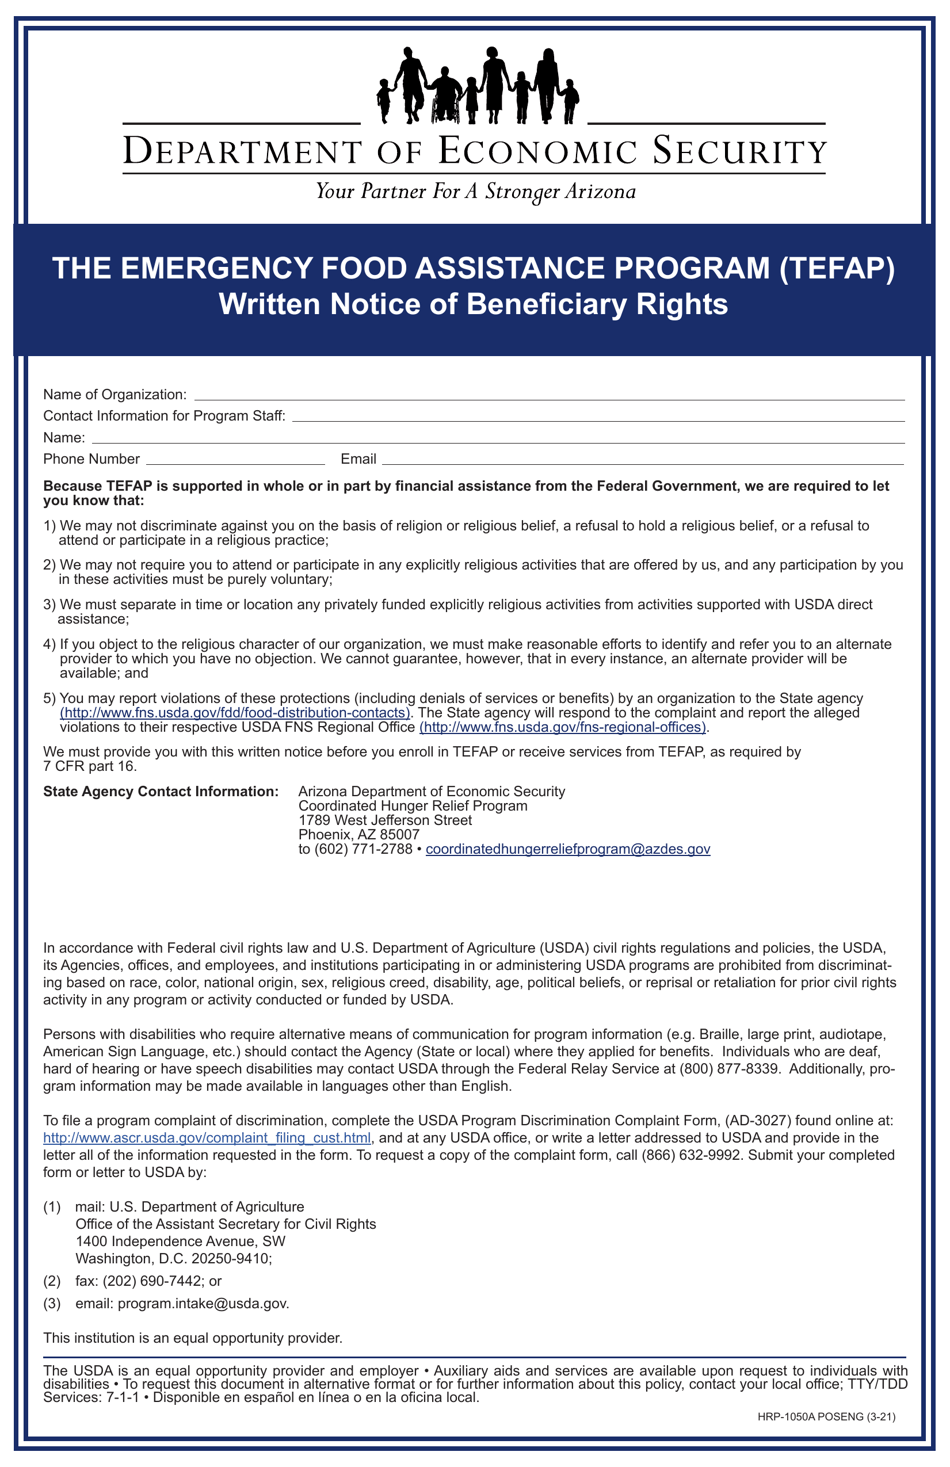 Form HRP-1050A The Emergency Food Assistance Program (Tefap) Written Notice of Beneficiary Rights - Arizona, Page 1